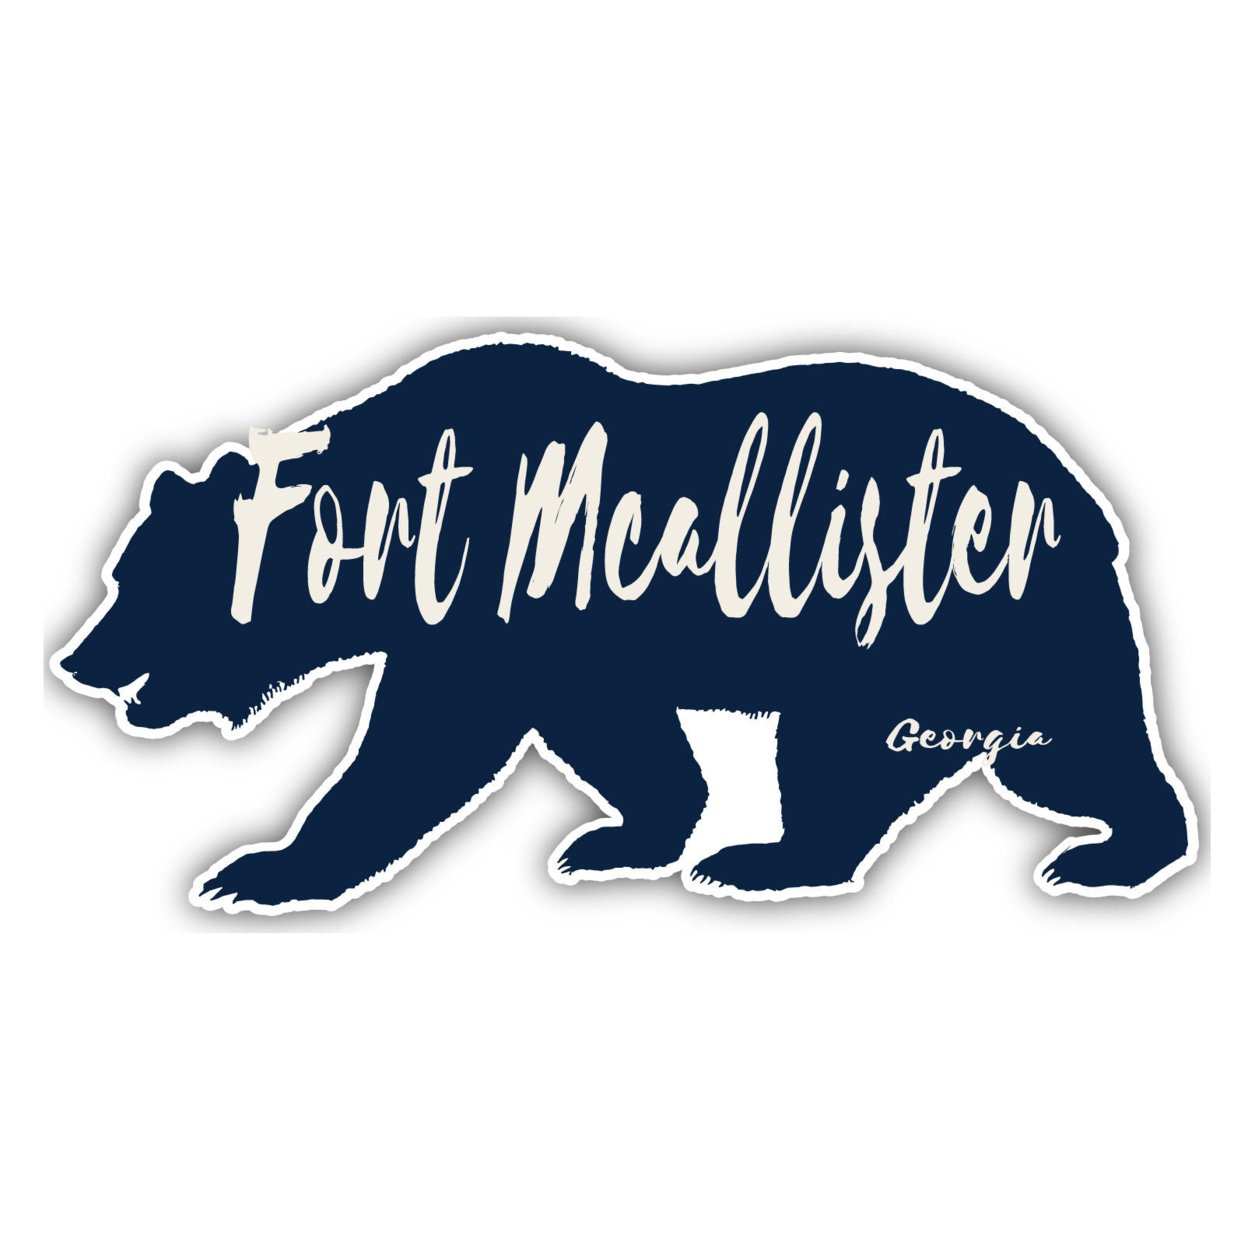 Fort McAllister Georgia Souvenir Decorative Stickers (Choose Theme And Size) - Single Unit, 10-Inch, Great Outdoors